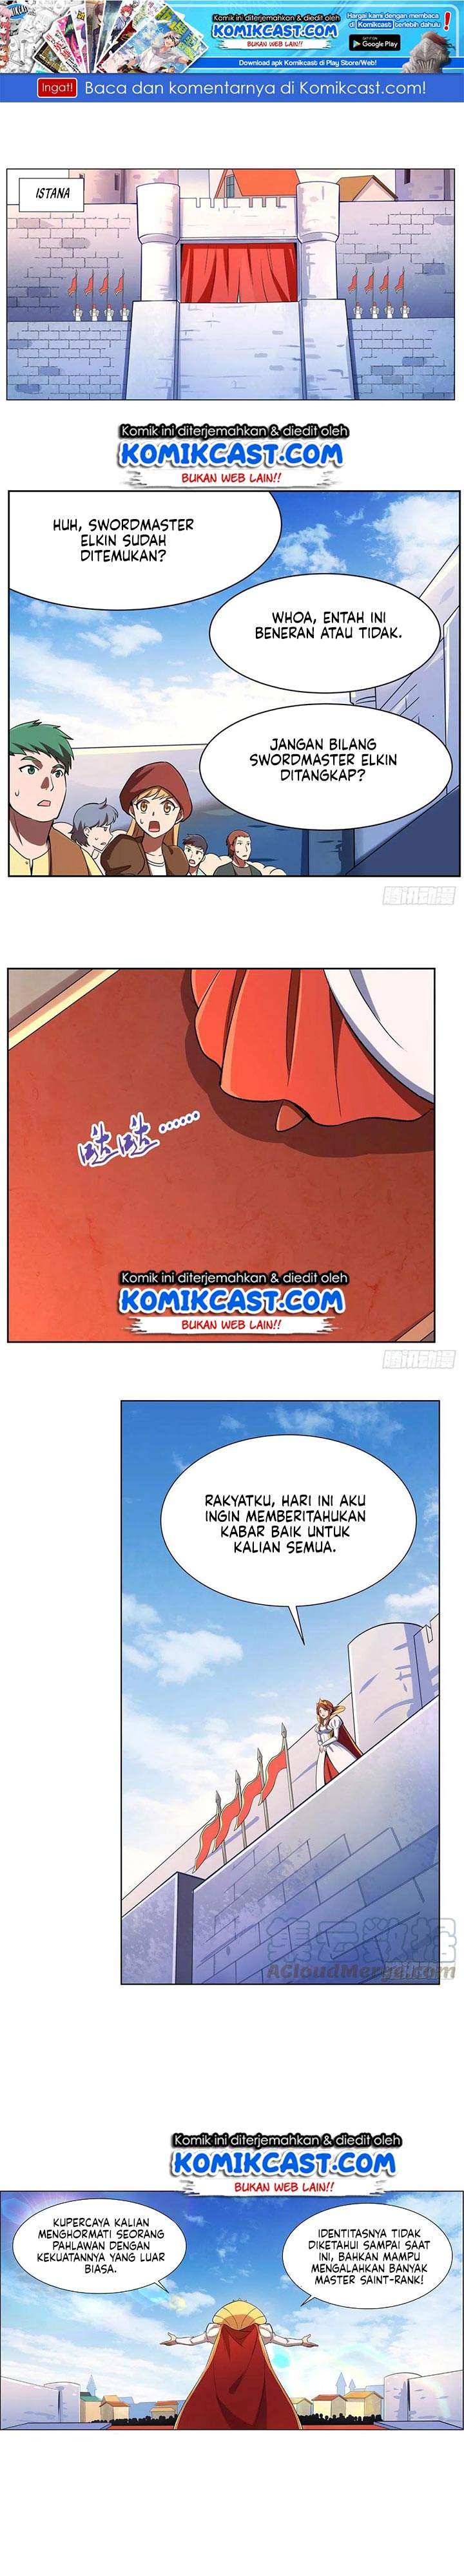 The Demon King Who Lost His Job Chapter 147 Bahasa Indonesia